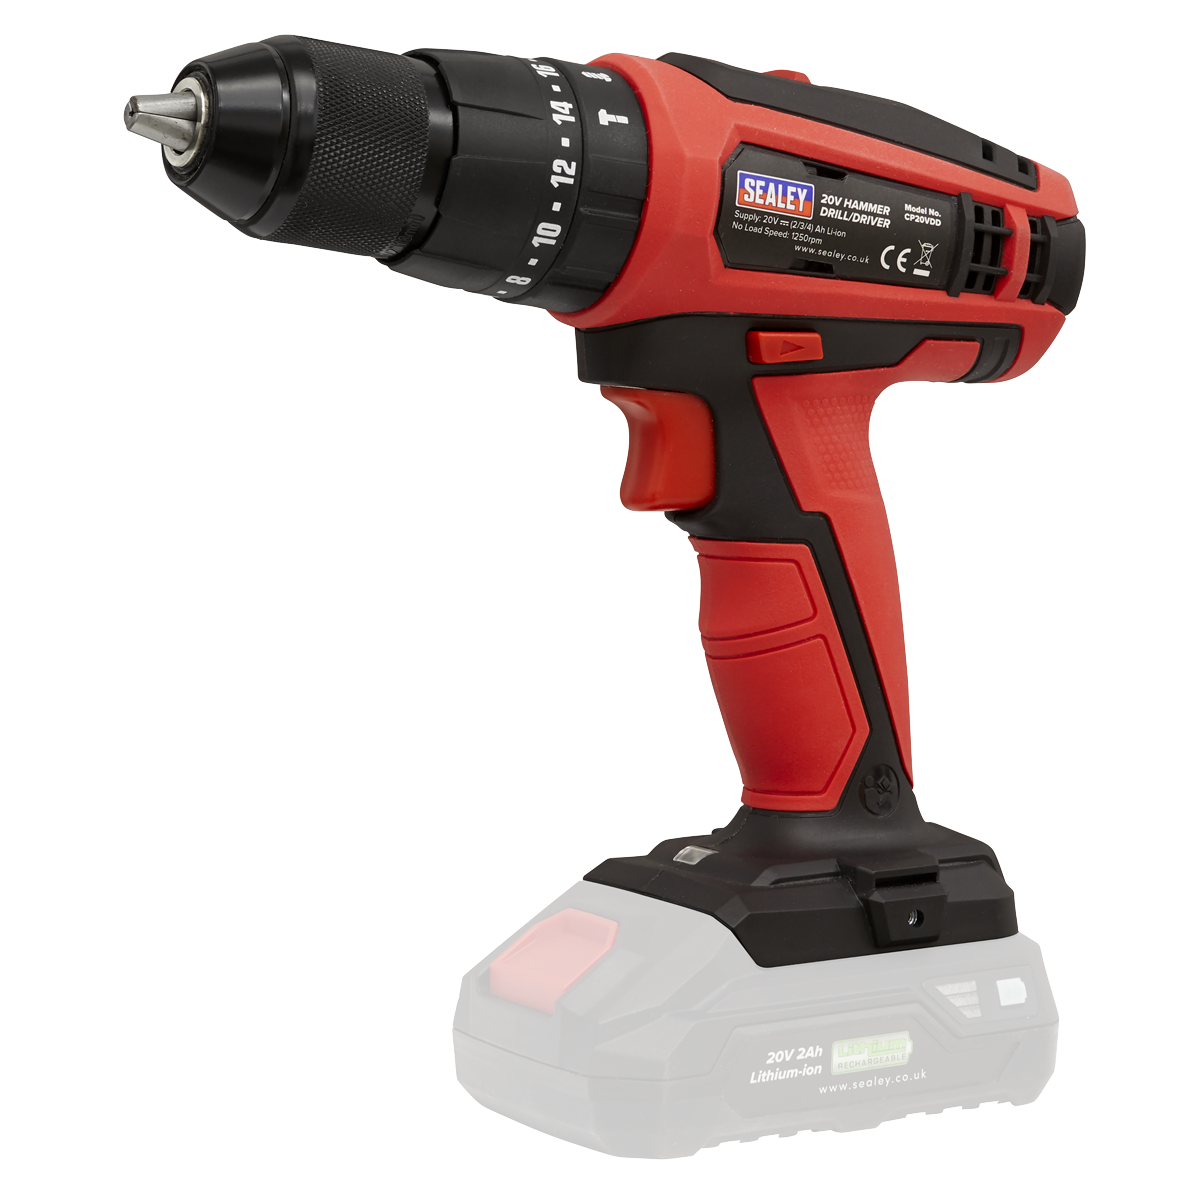 Sealey CP20VCOMBO12 2 x 20V SV20 Series Cordless Router & Combi Drill Kit - 2 Batteries